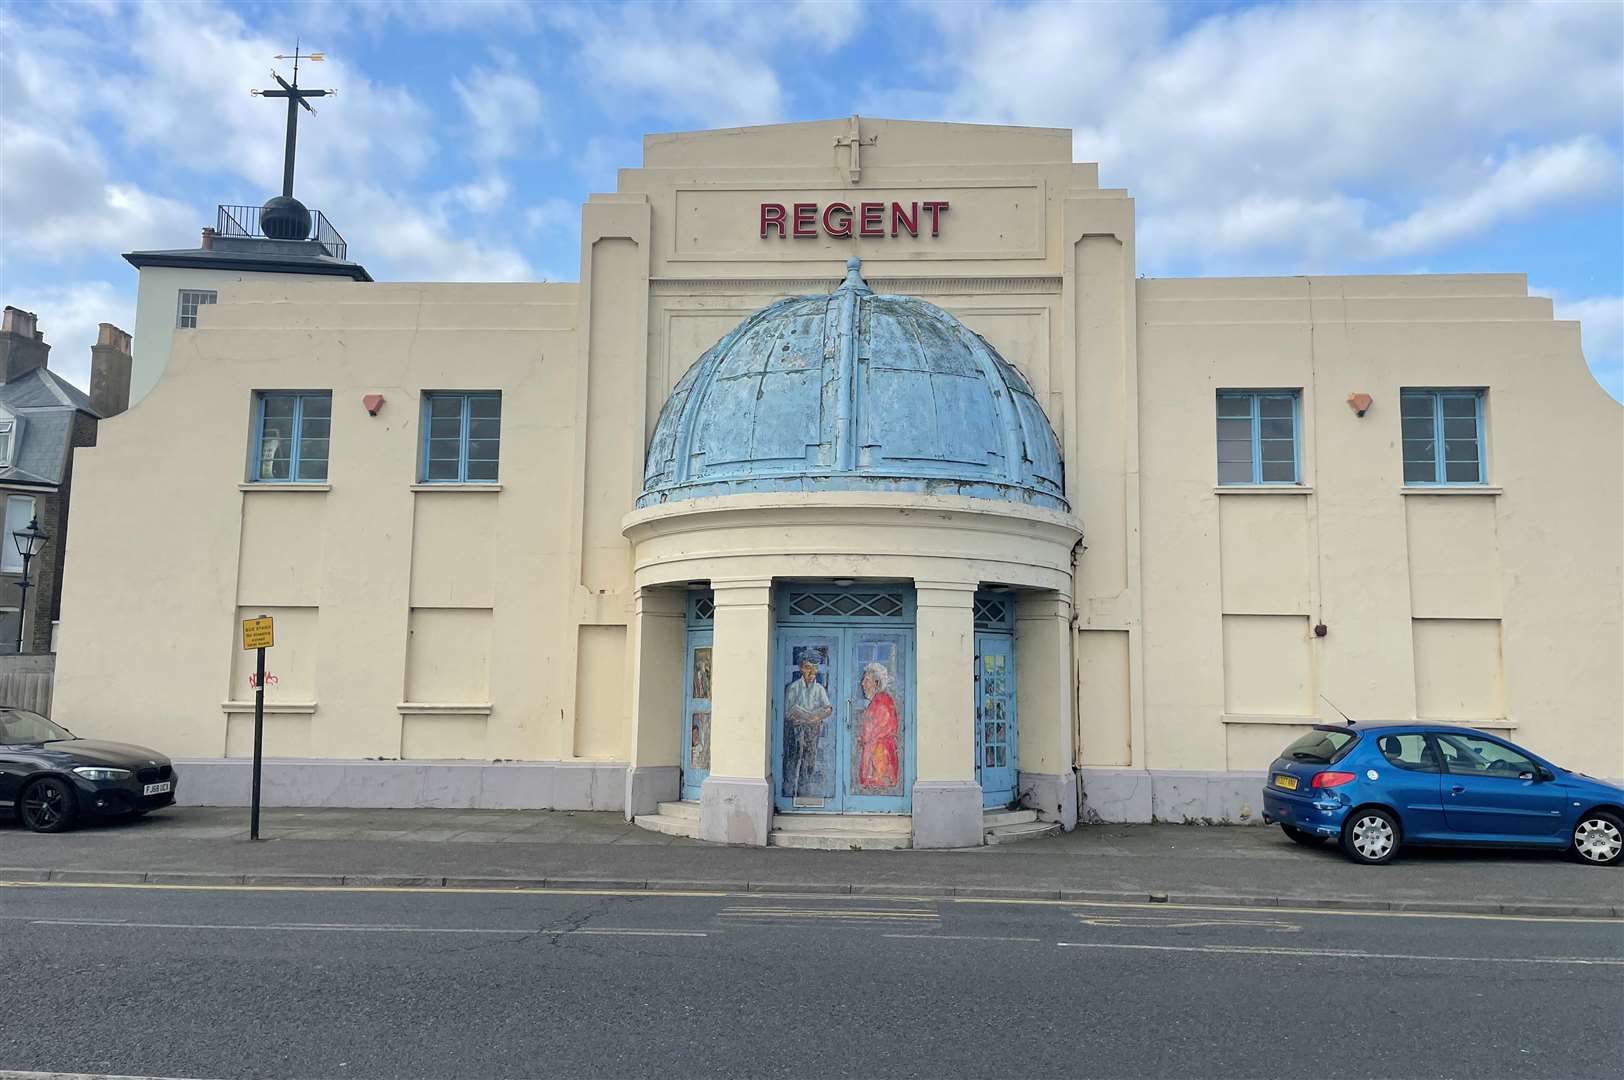 The Regent cinema in Deal is at the centre of regeneration plans